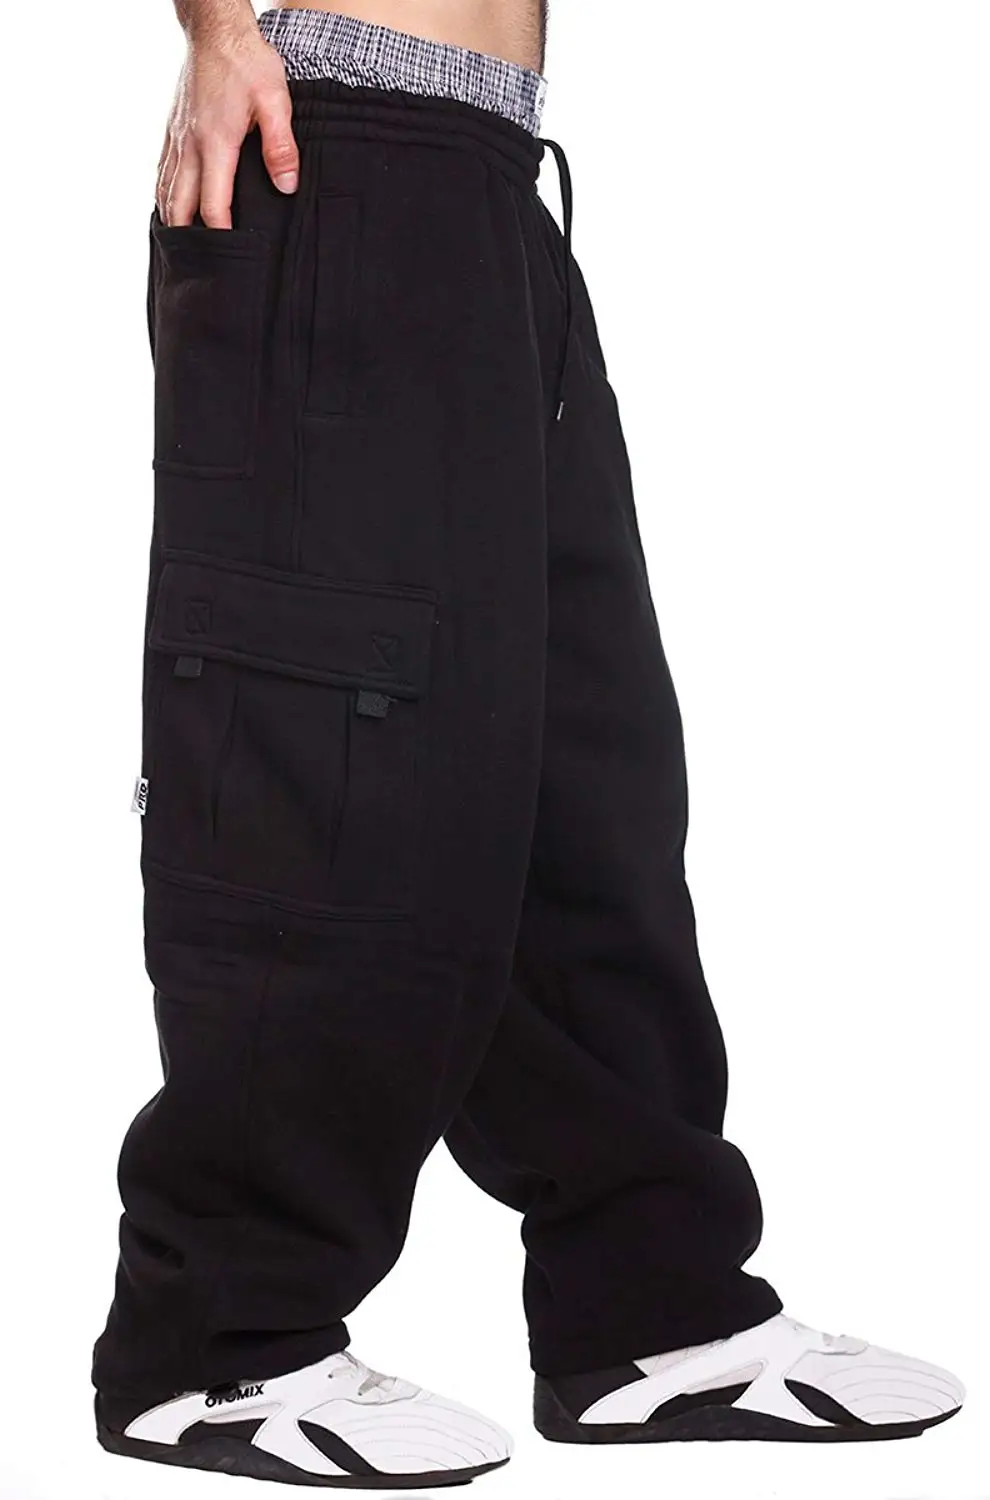 Cheap Cargo Sweatpants, find Cargo Sweatpants deals on line at Alibaba.com